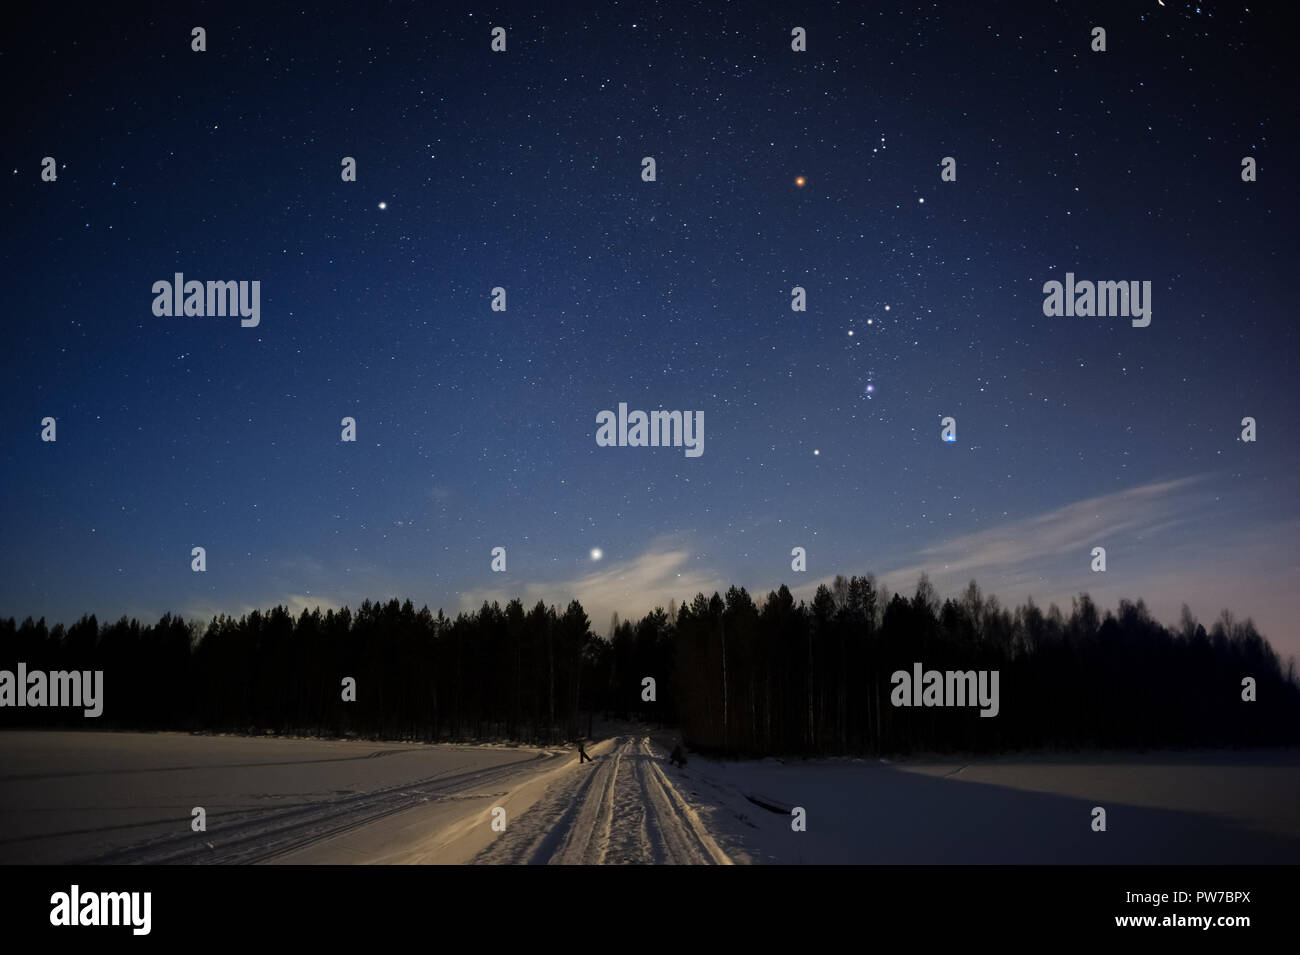 Orion constellation and Sirius above forest in winter sky Stock Photo